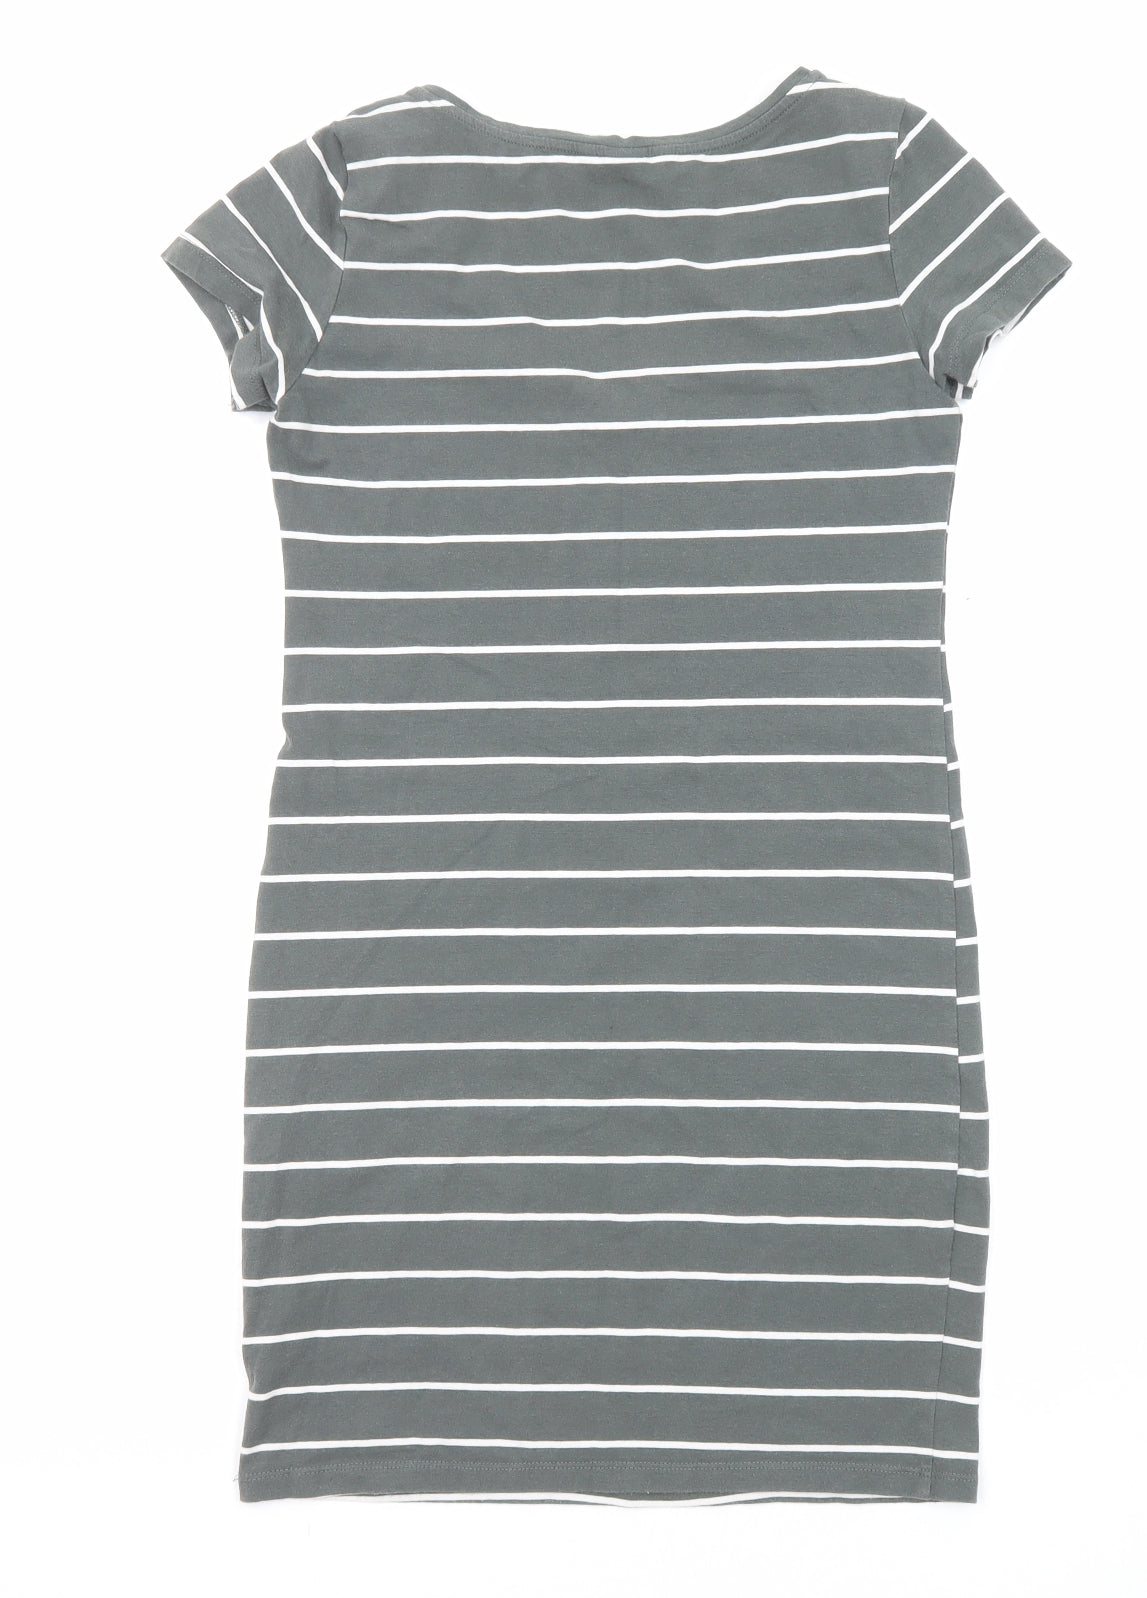 H&M Womens Grey Striped Polyester T-Shirt Dress Size S V-Neck Pullover